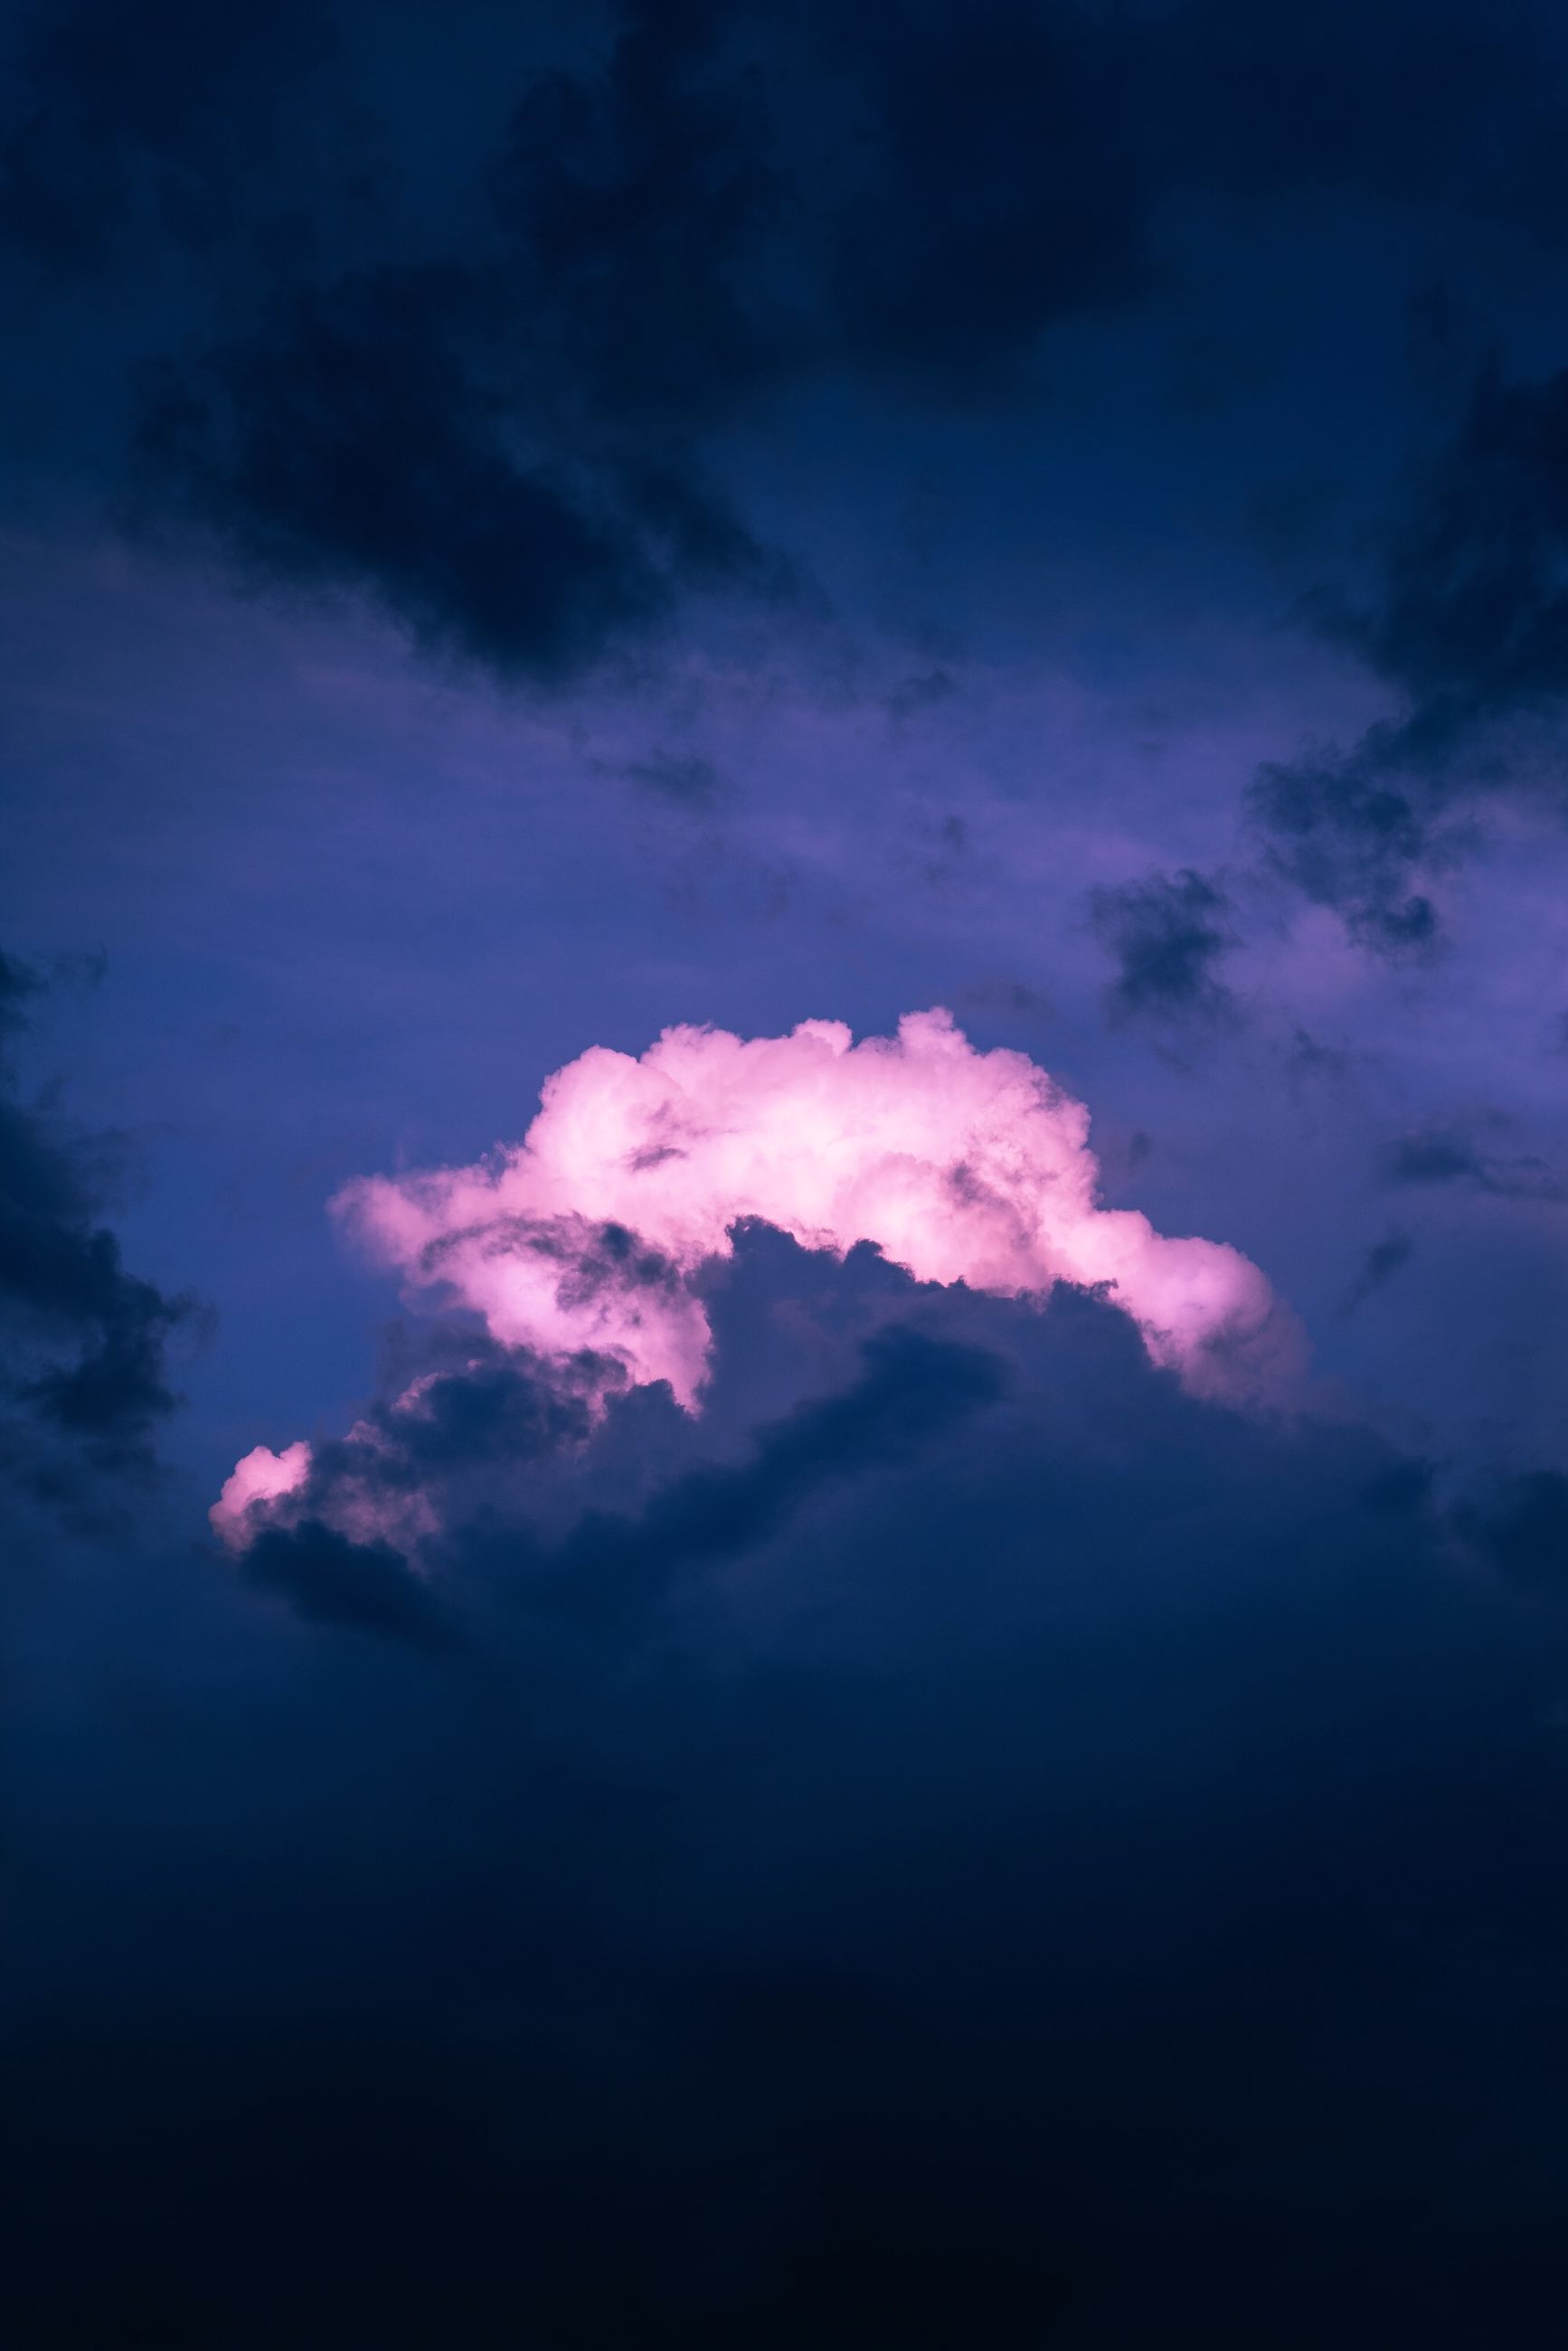 cloud - sky, sky, beauty in nature, low angle view, scenics - nature, tranquility, tranquil scene, no people, nature, outdoors, idyllic, sunset, pink color, blue, cloudscape, backgrounds, dusk, fluffy, night, meteorology